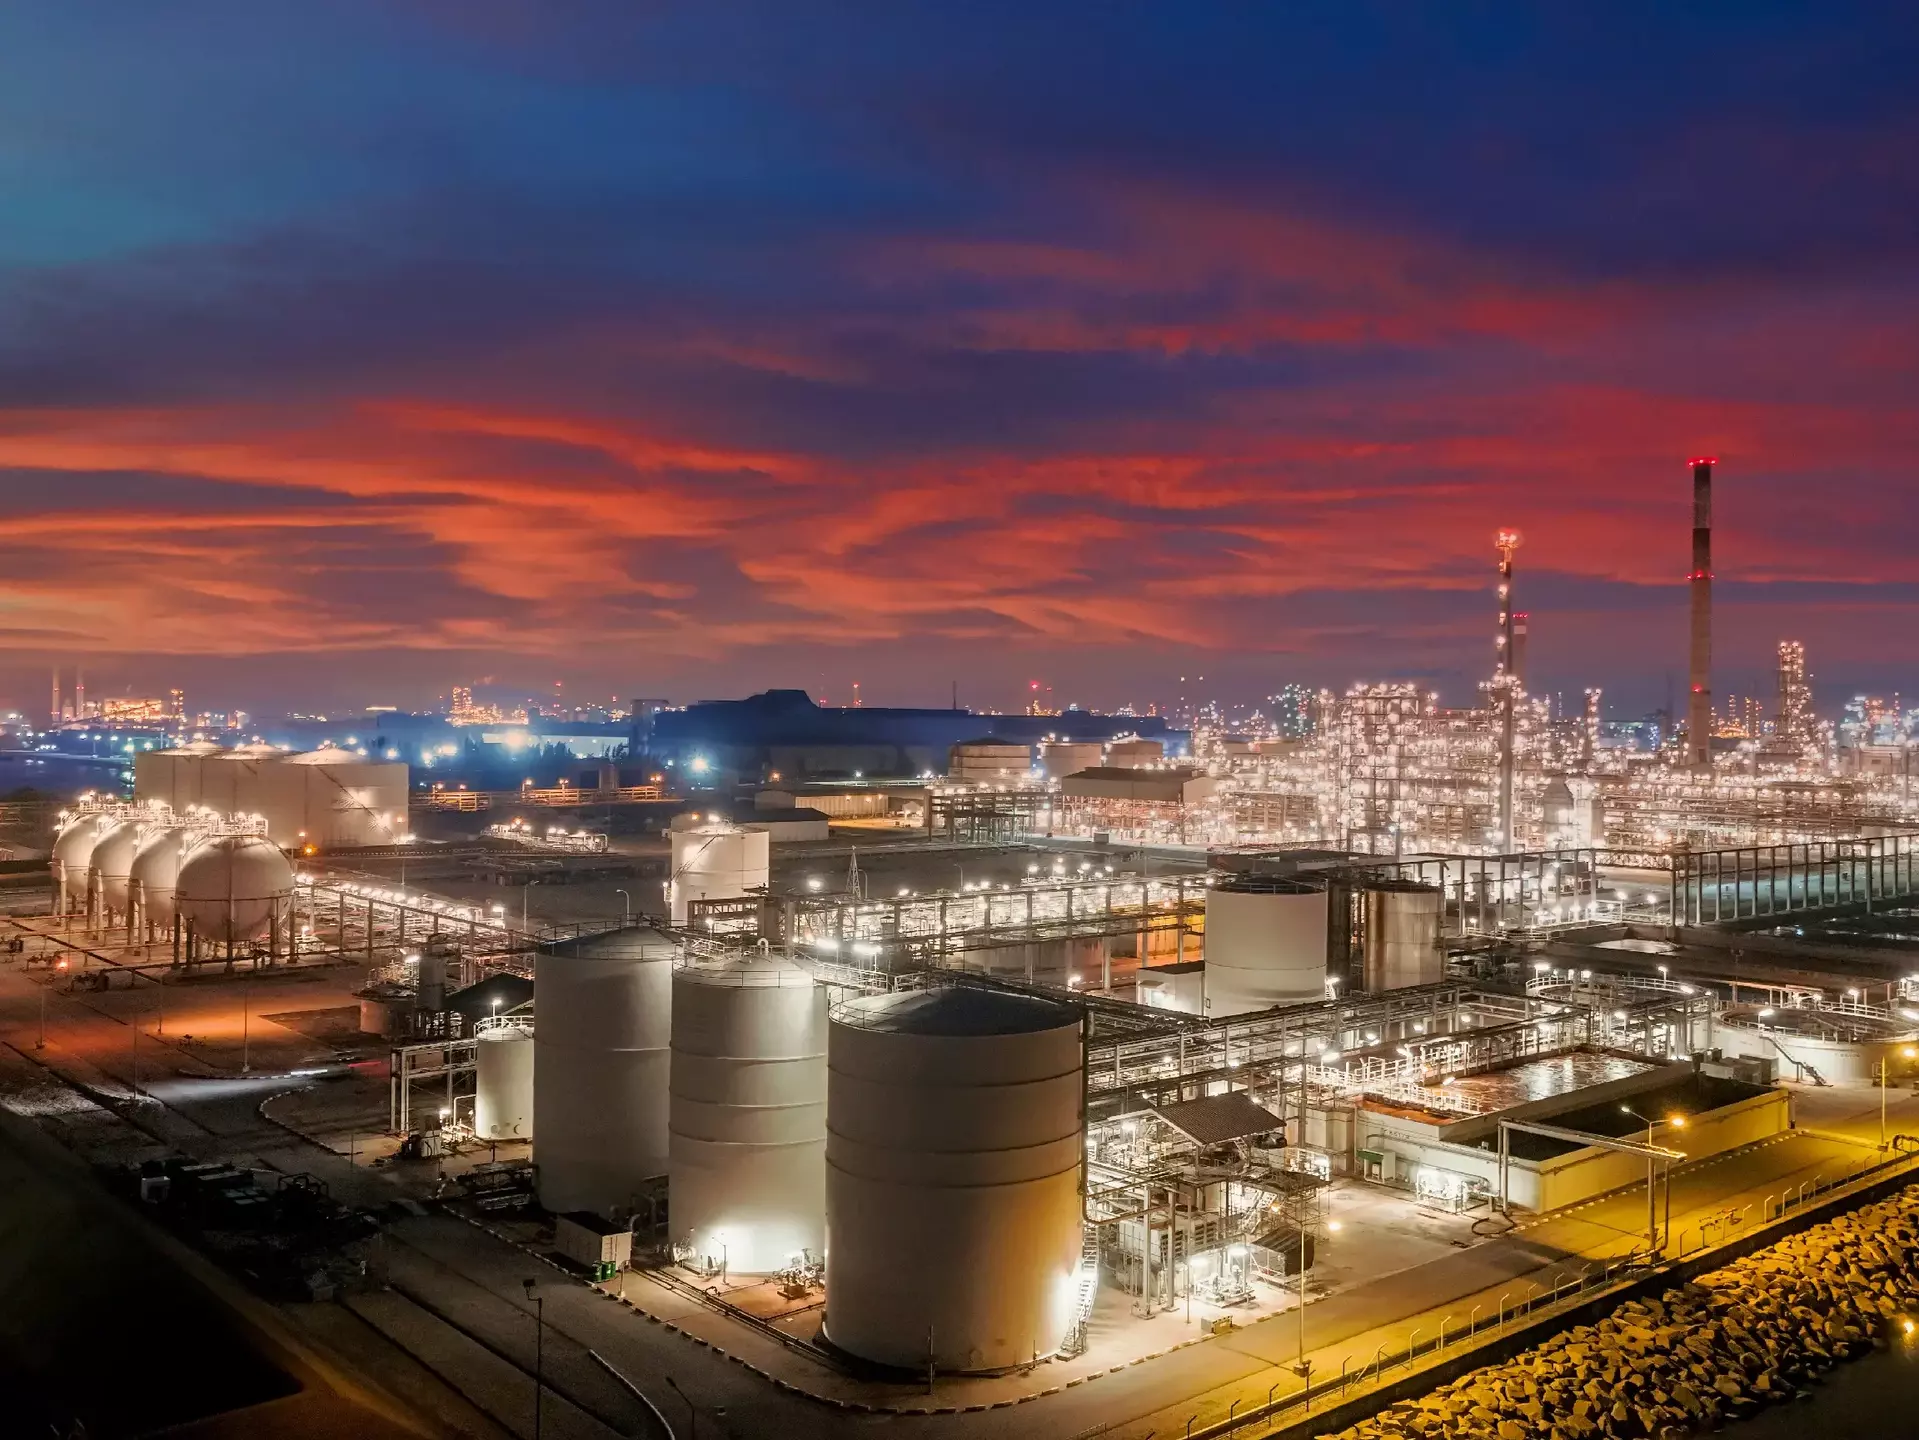 Oil refinery with beautiful sky for oil or energy industry background